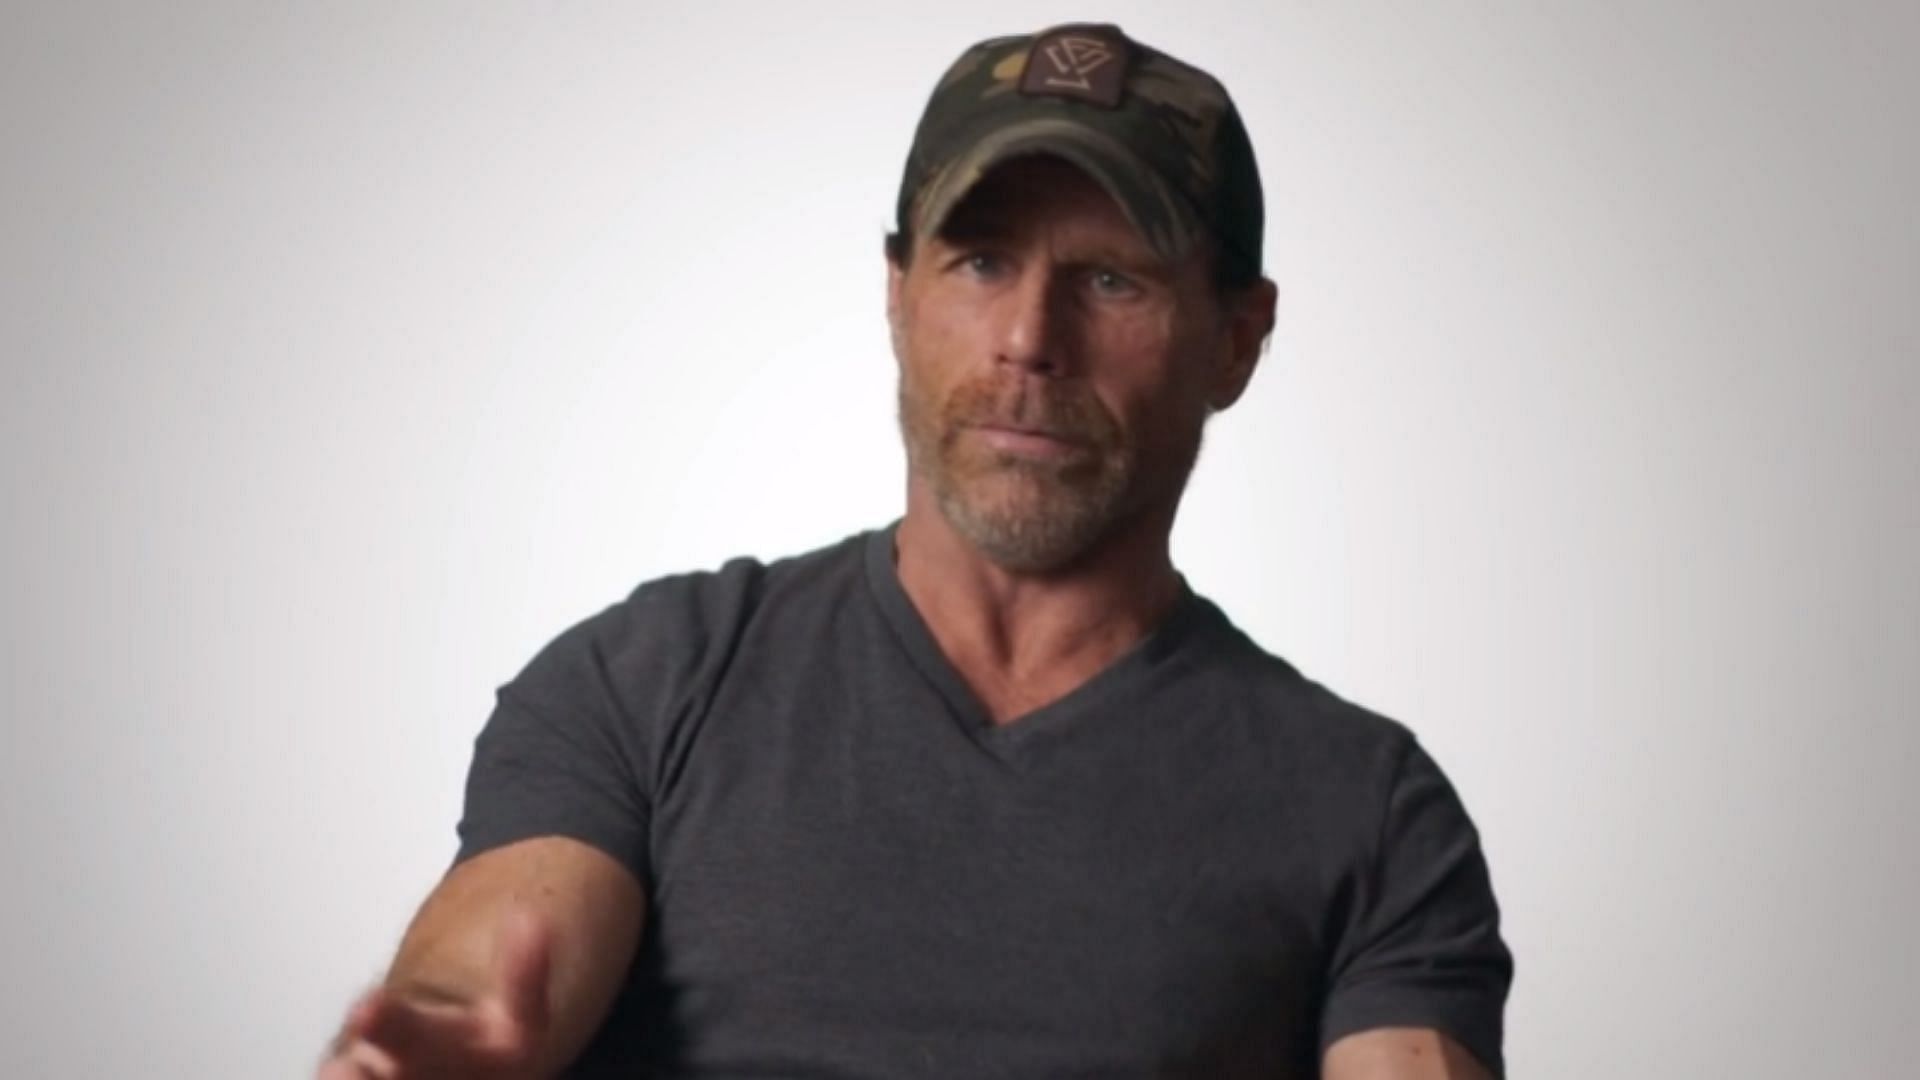 Shawn Michaels is in charge of NXT